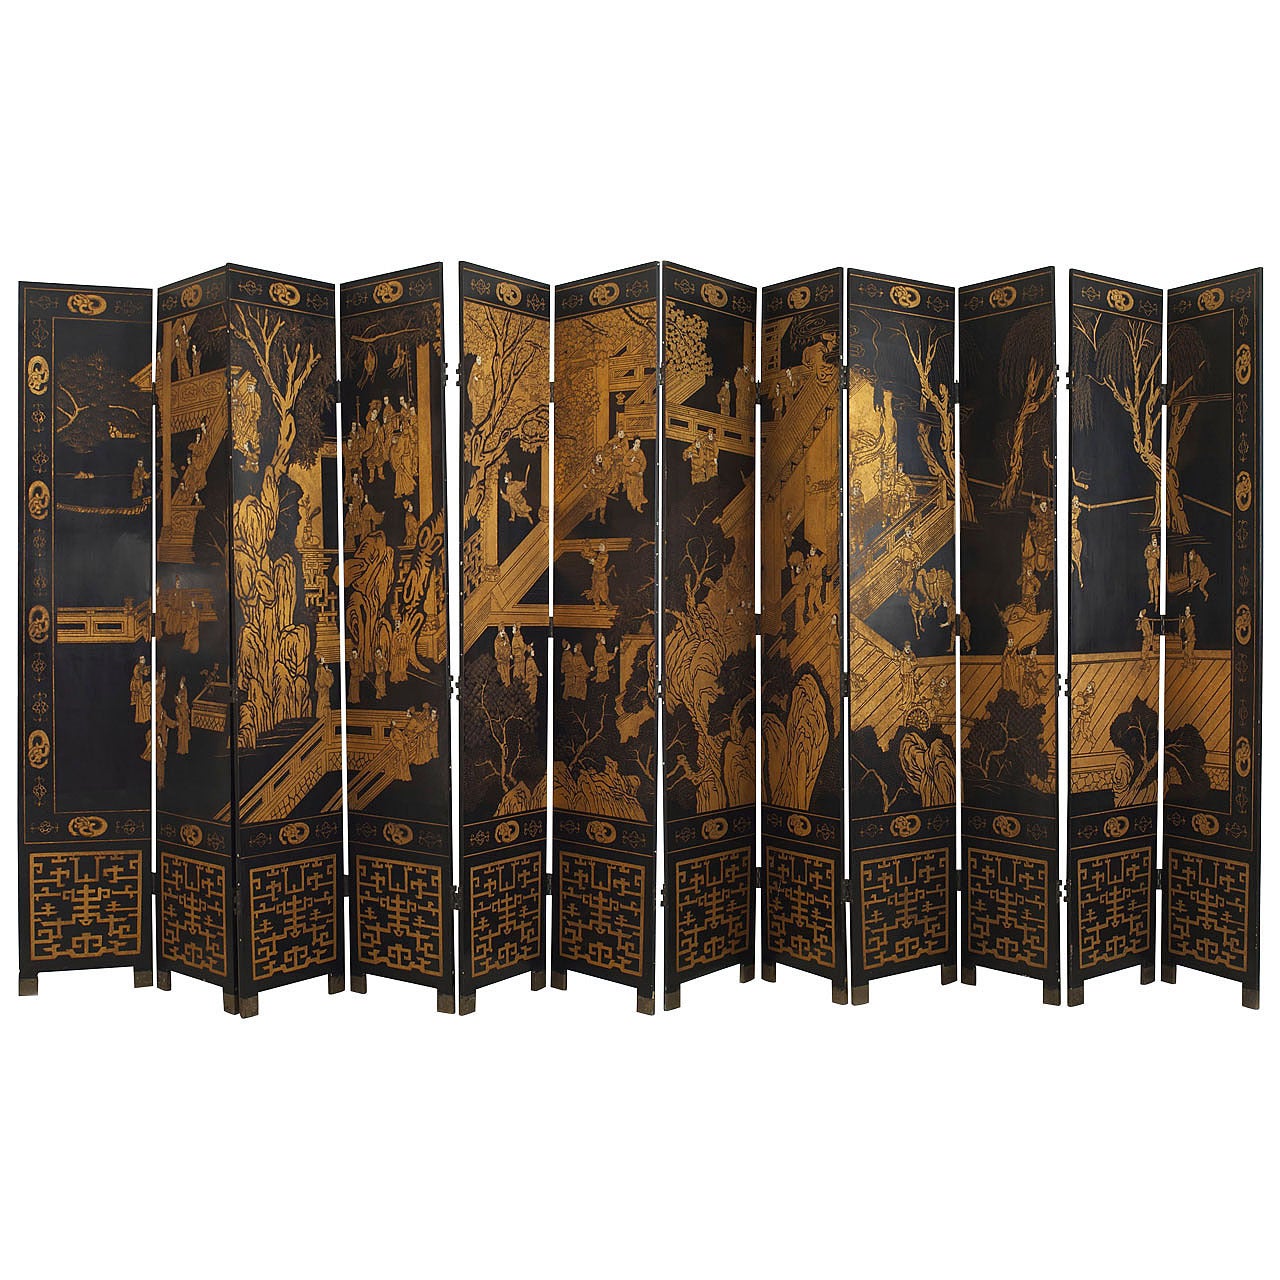 Chinese Lacquered 12-Panel Screen